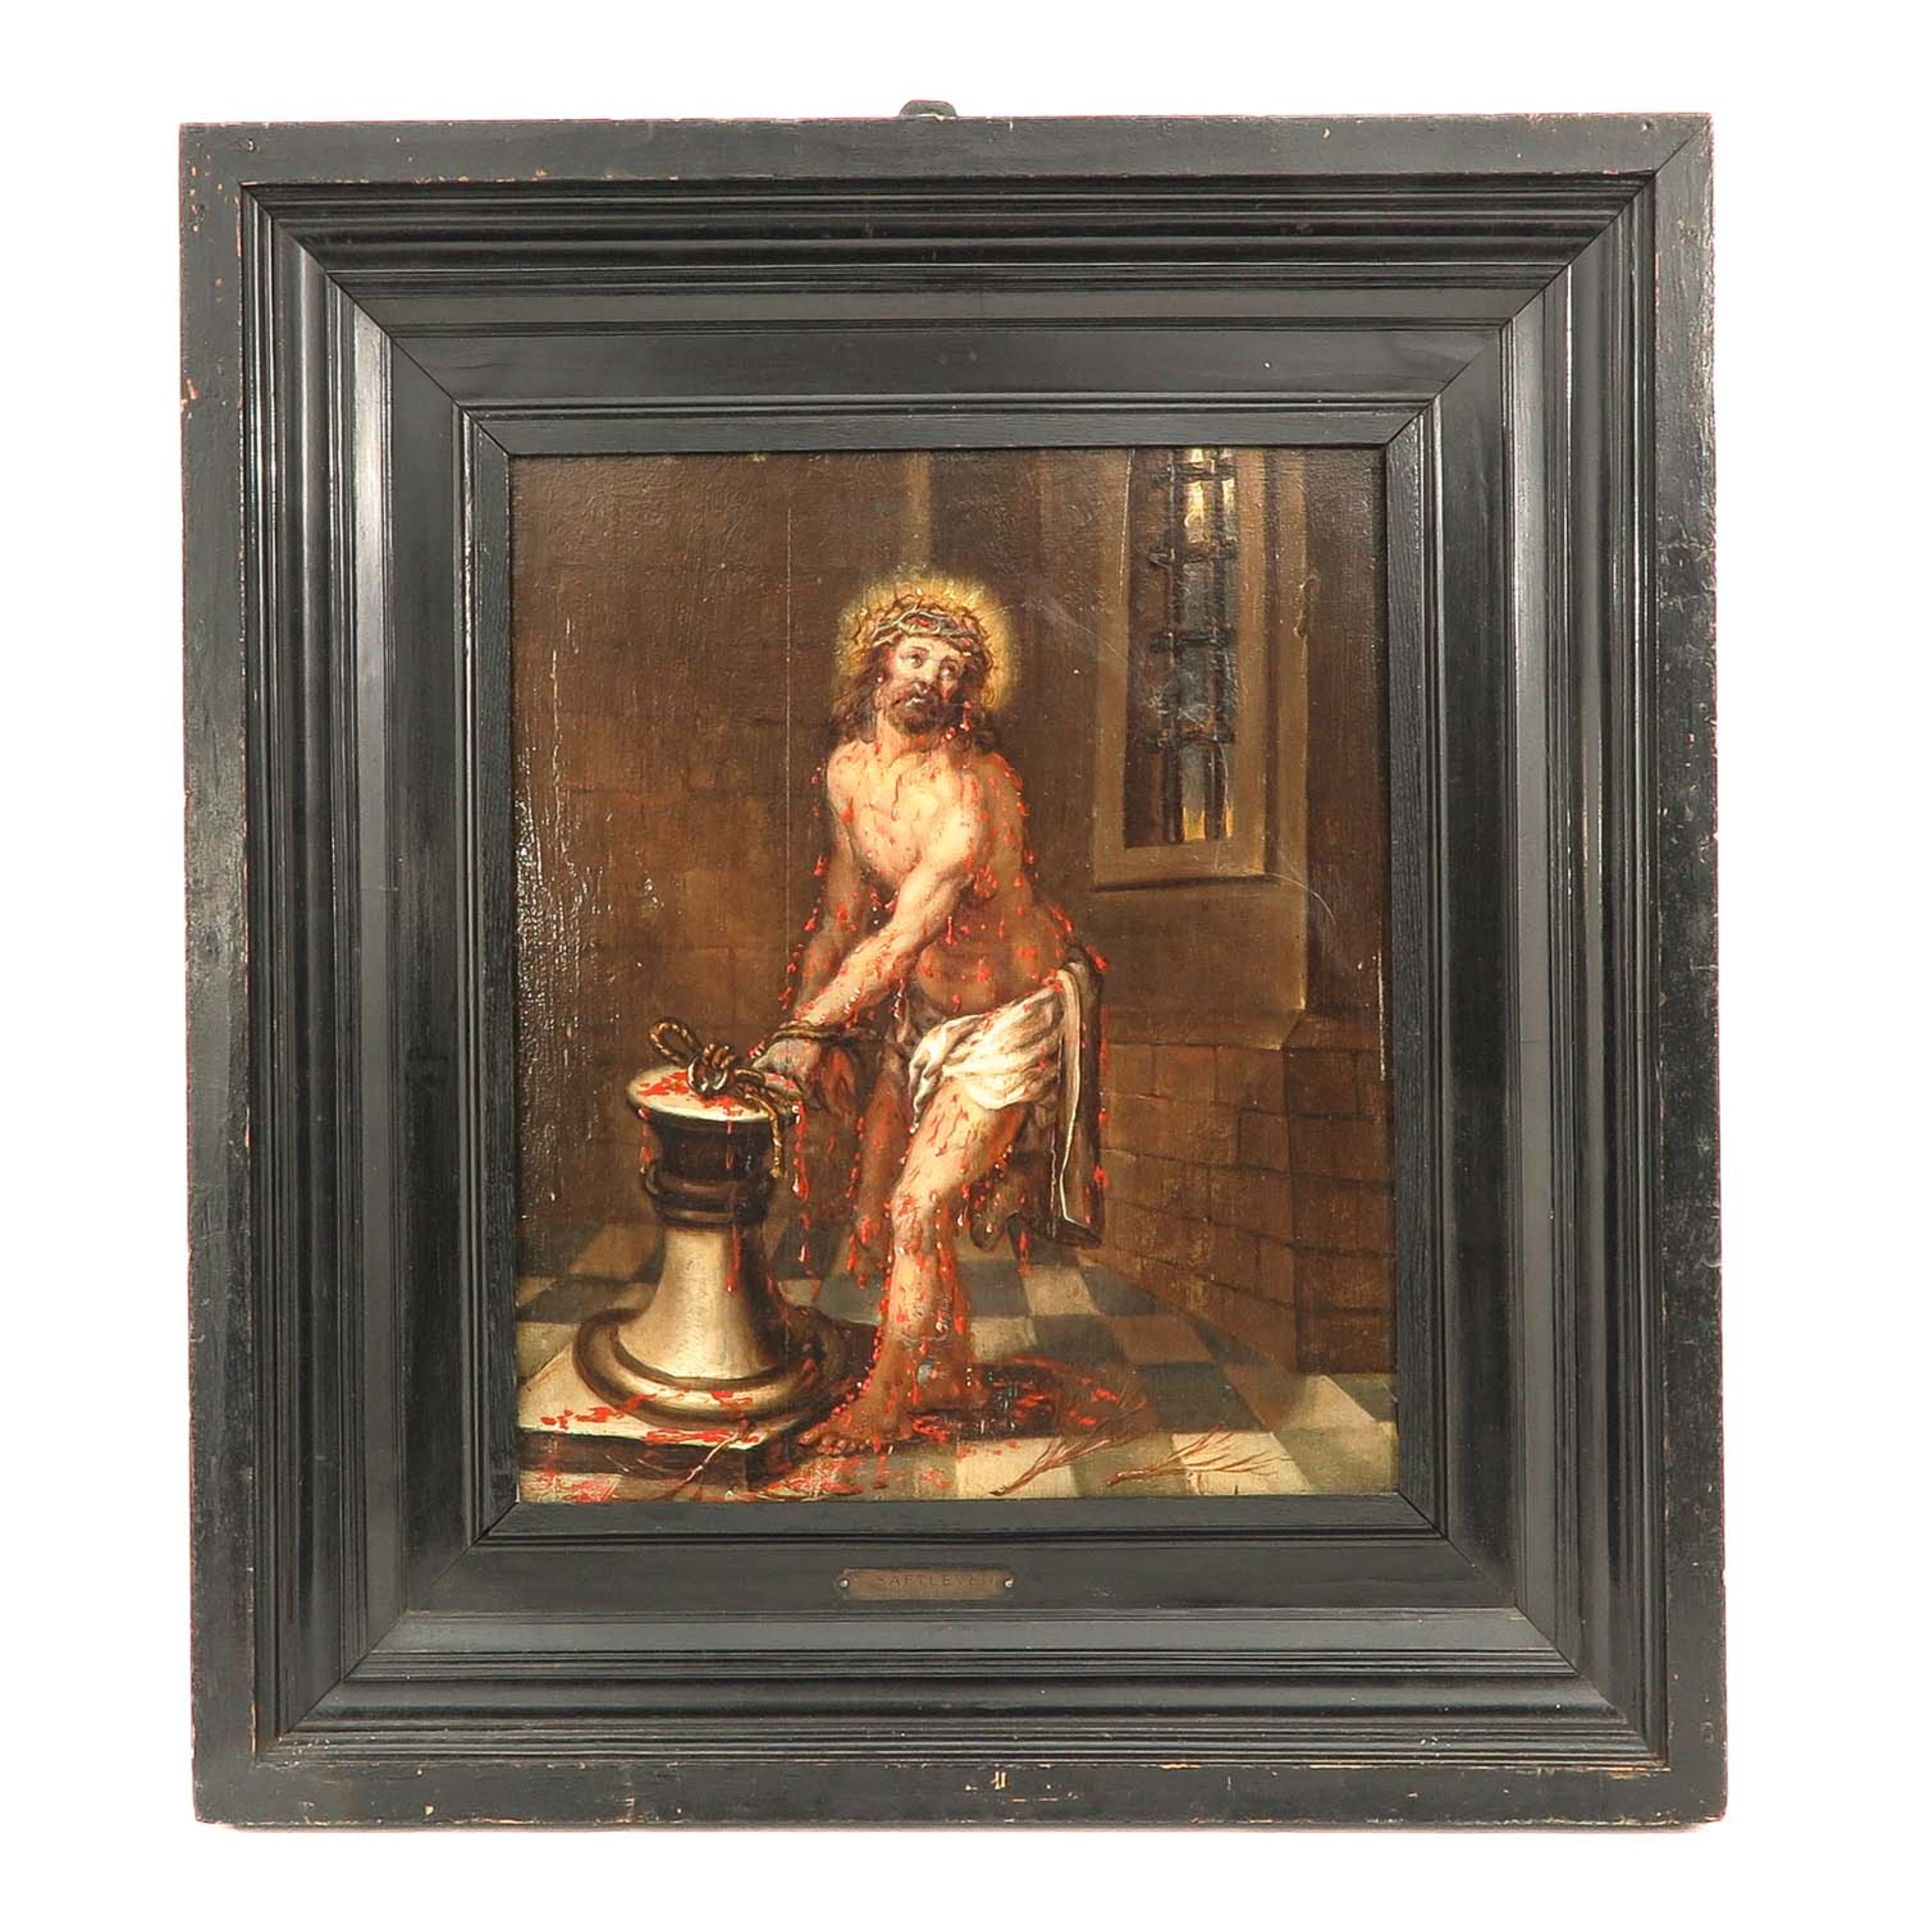 A 17th - 18th Century Religious Oil on Panel